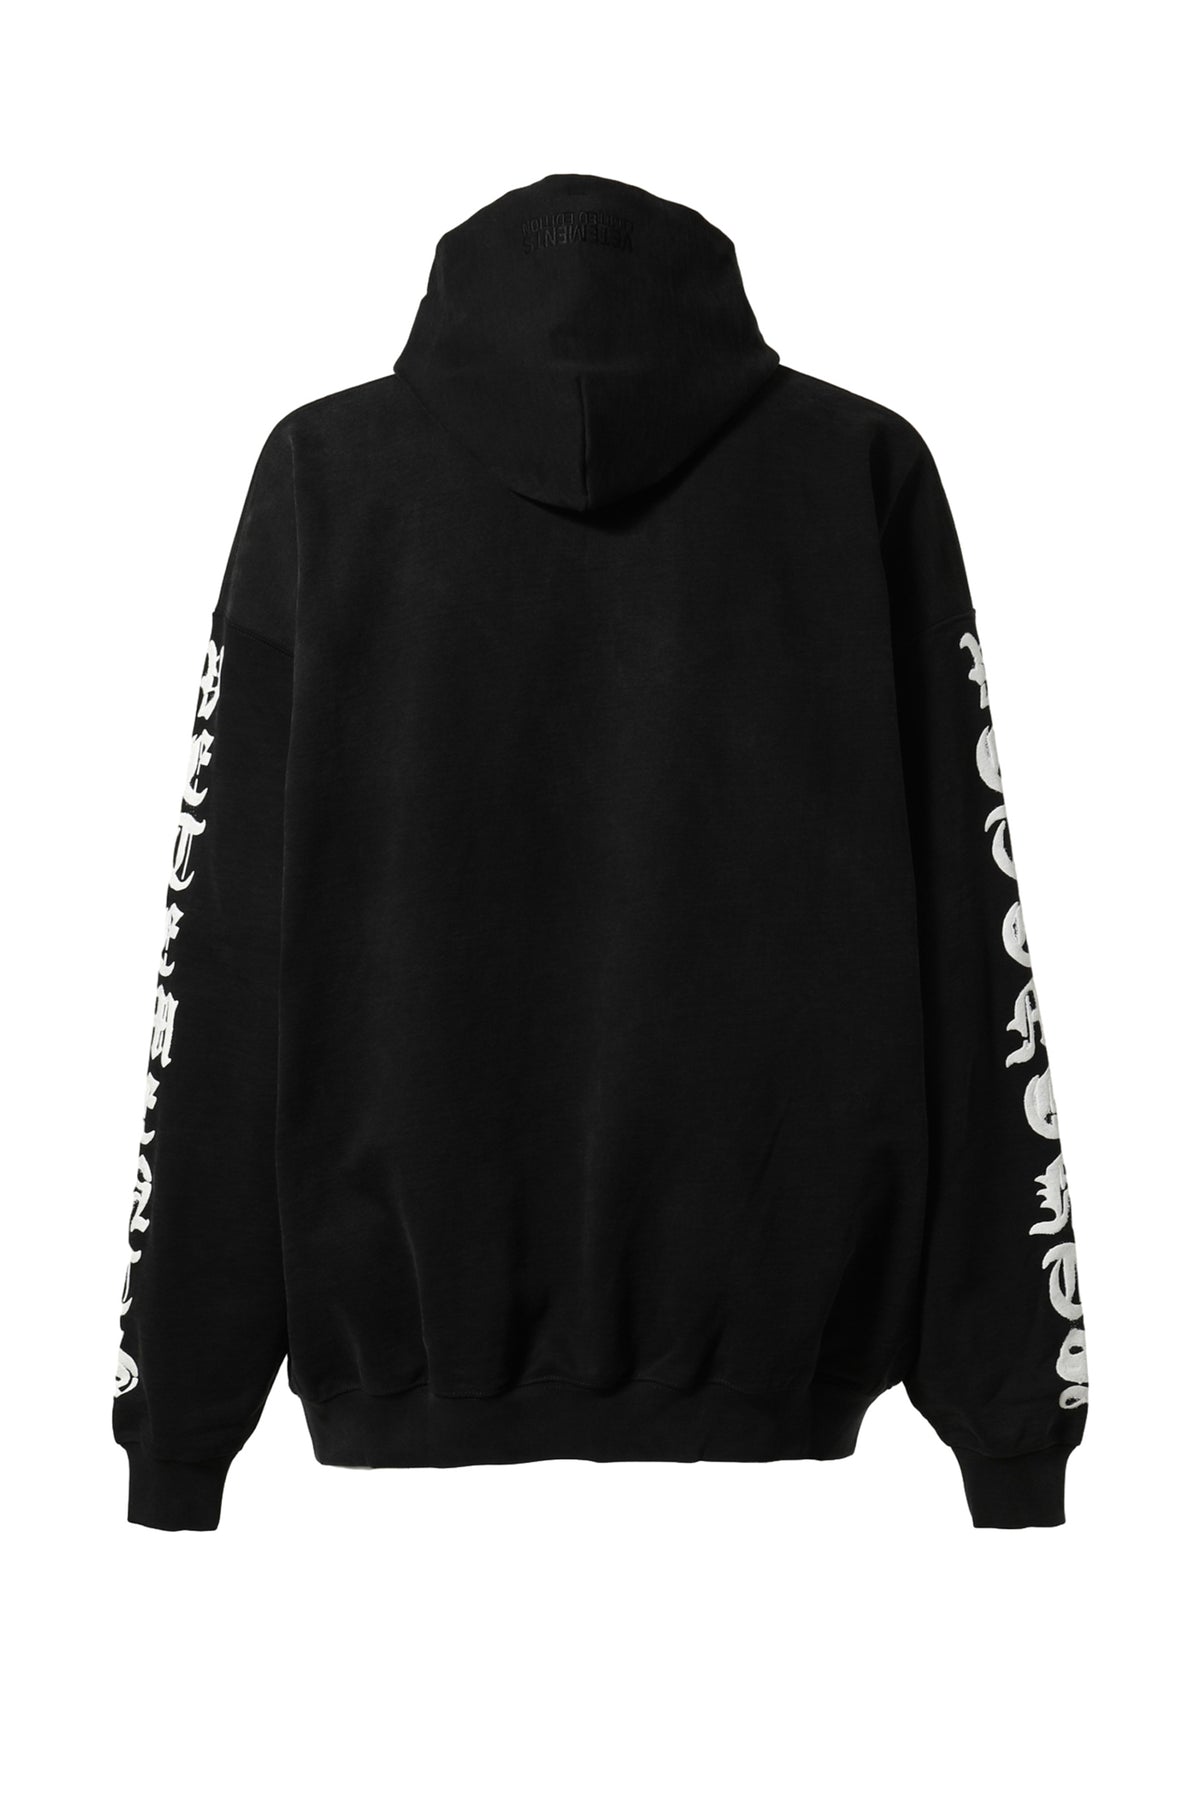 REVERSE ANARCHY HOODIE / WASHED BLK WHT